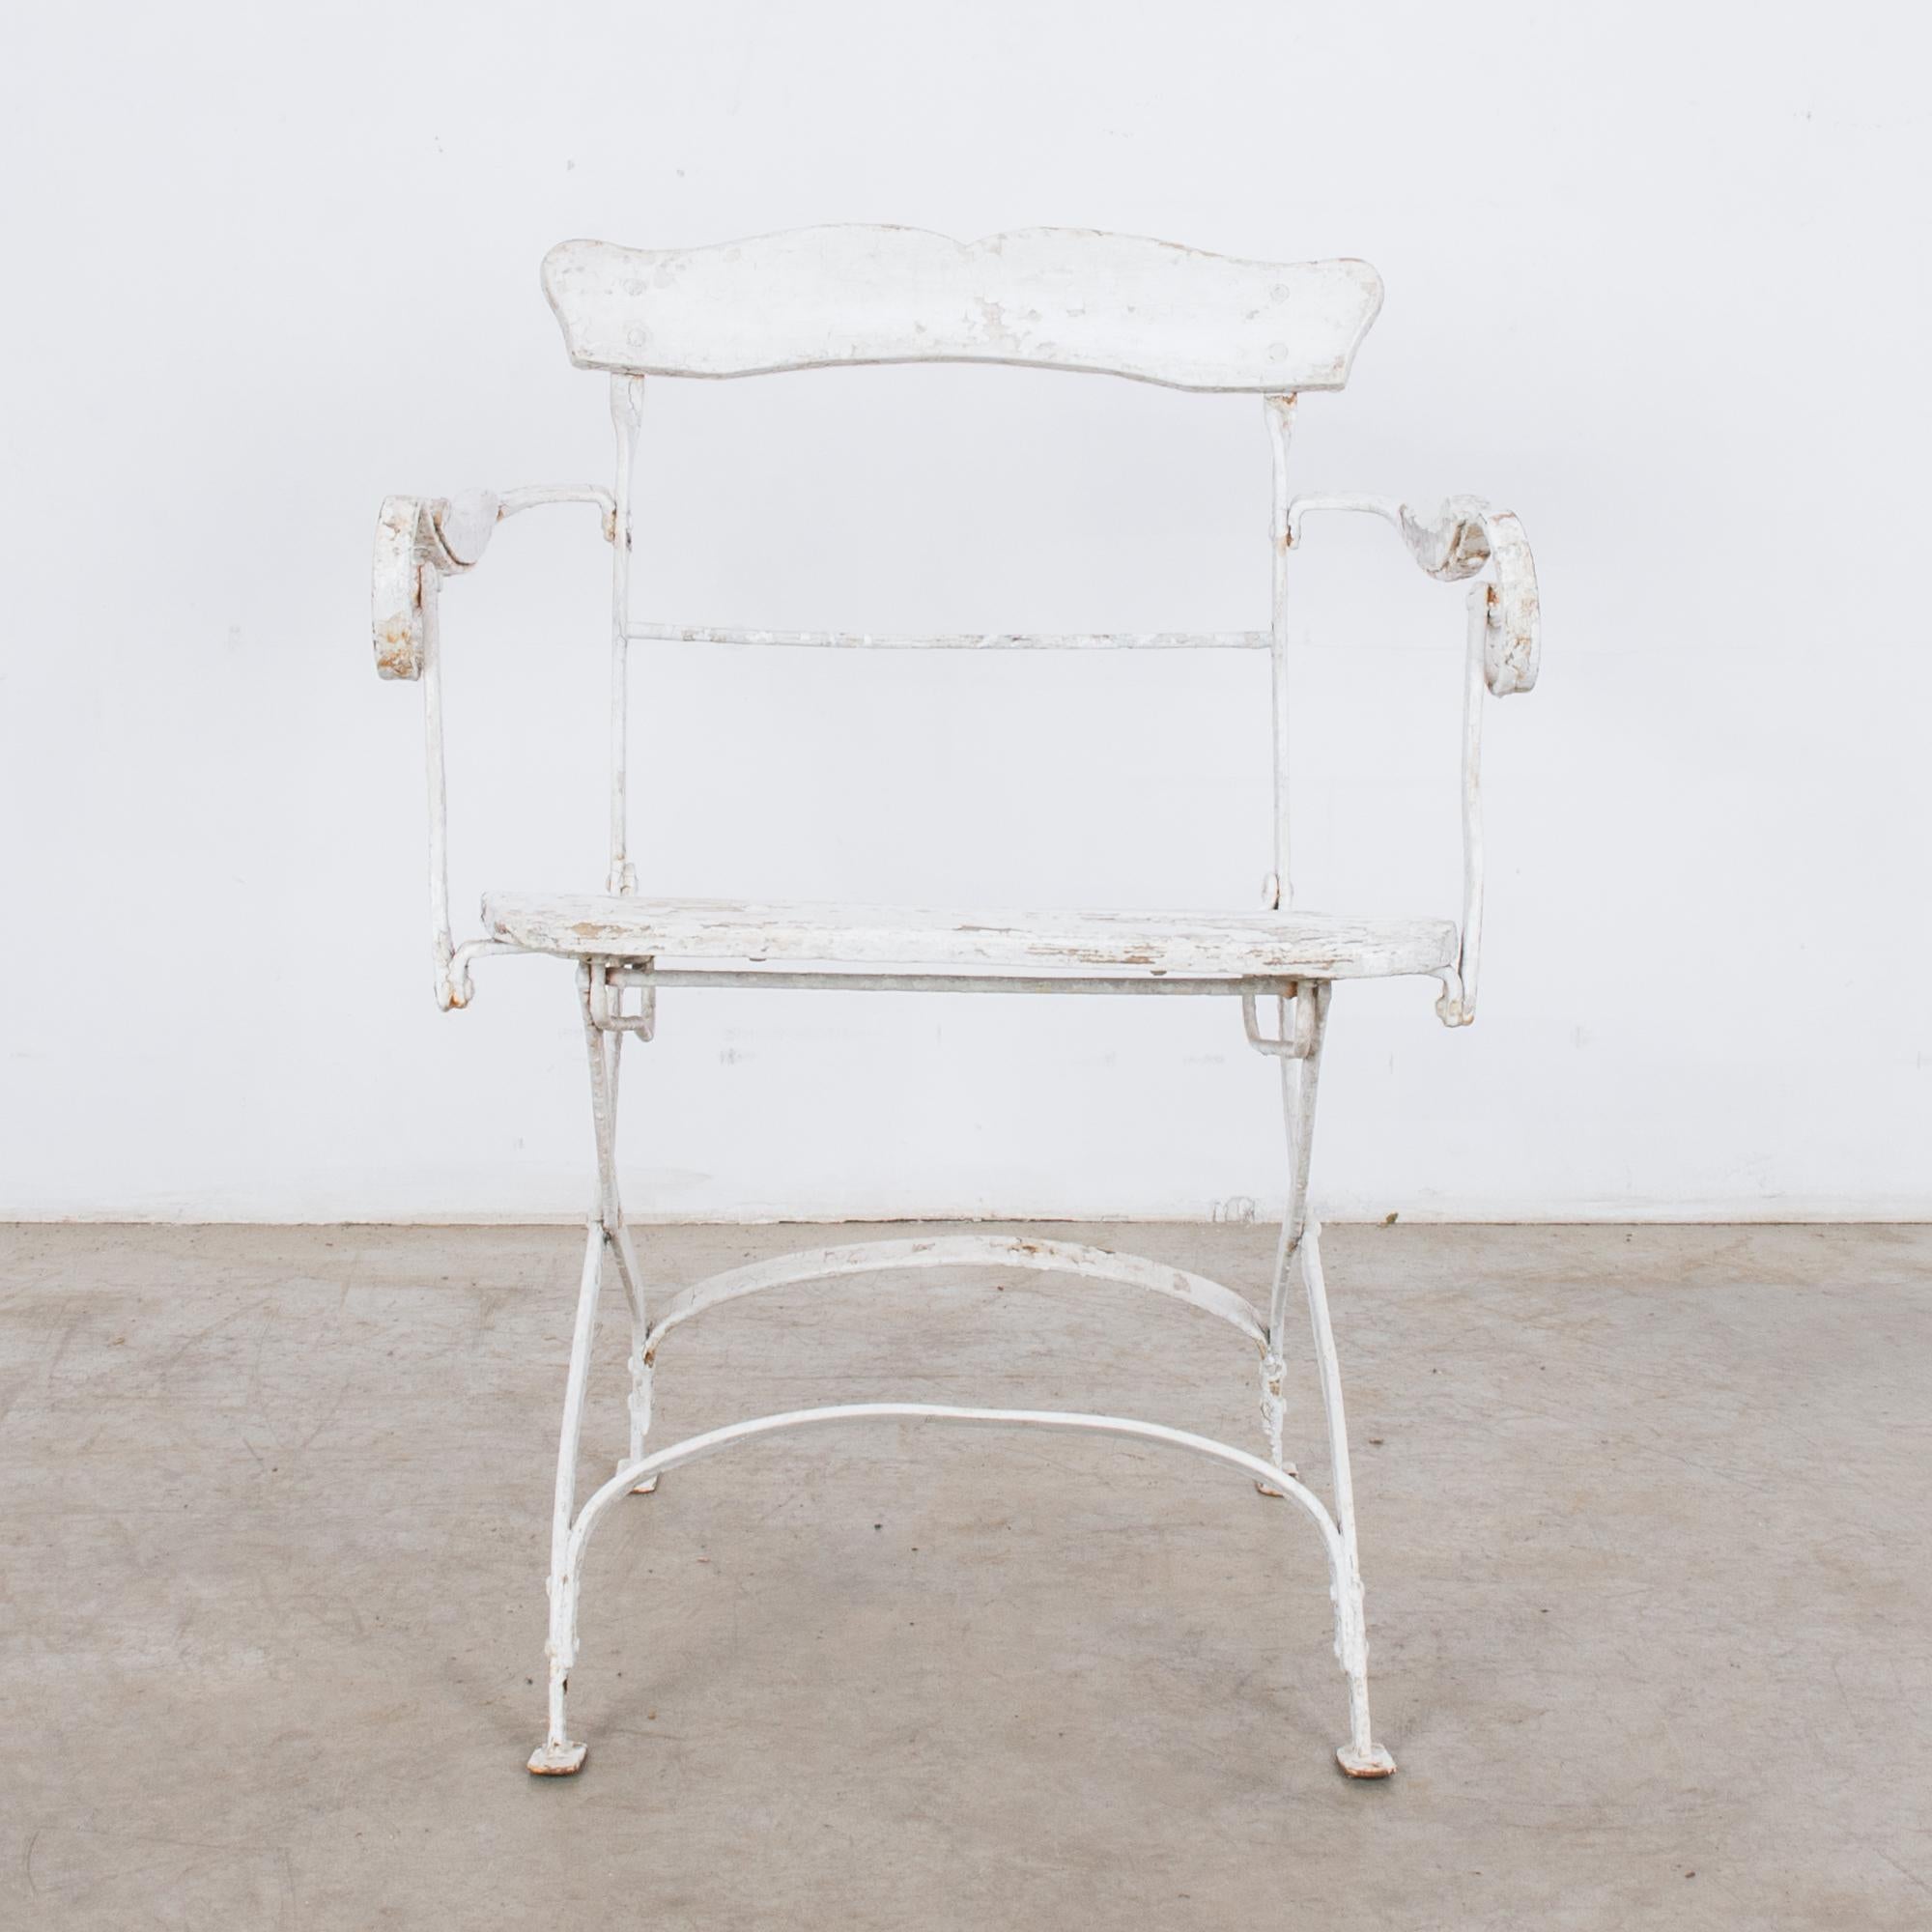 This metal garden chair was made in France. Originally painted white, the chair features a lovely patina, which evokes the rustic ambience of the French countryside. The scroll armrests and curves of the back and legs give the chair a graceful